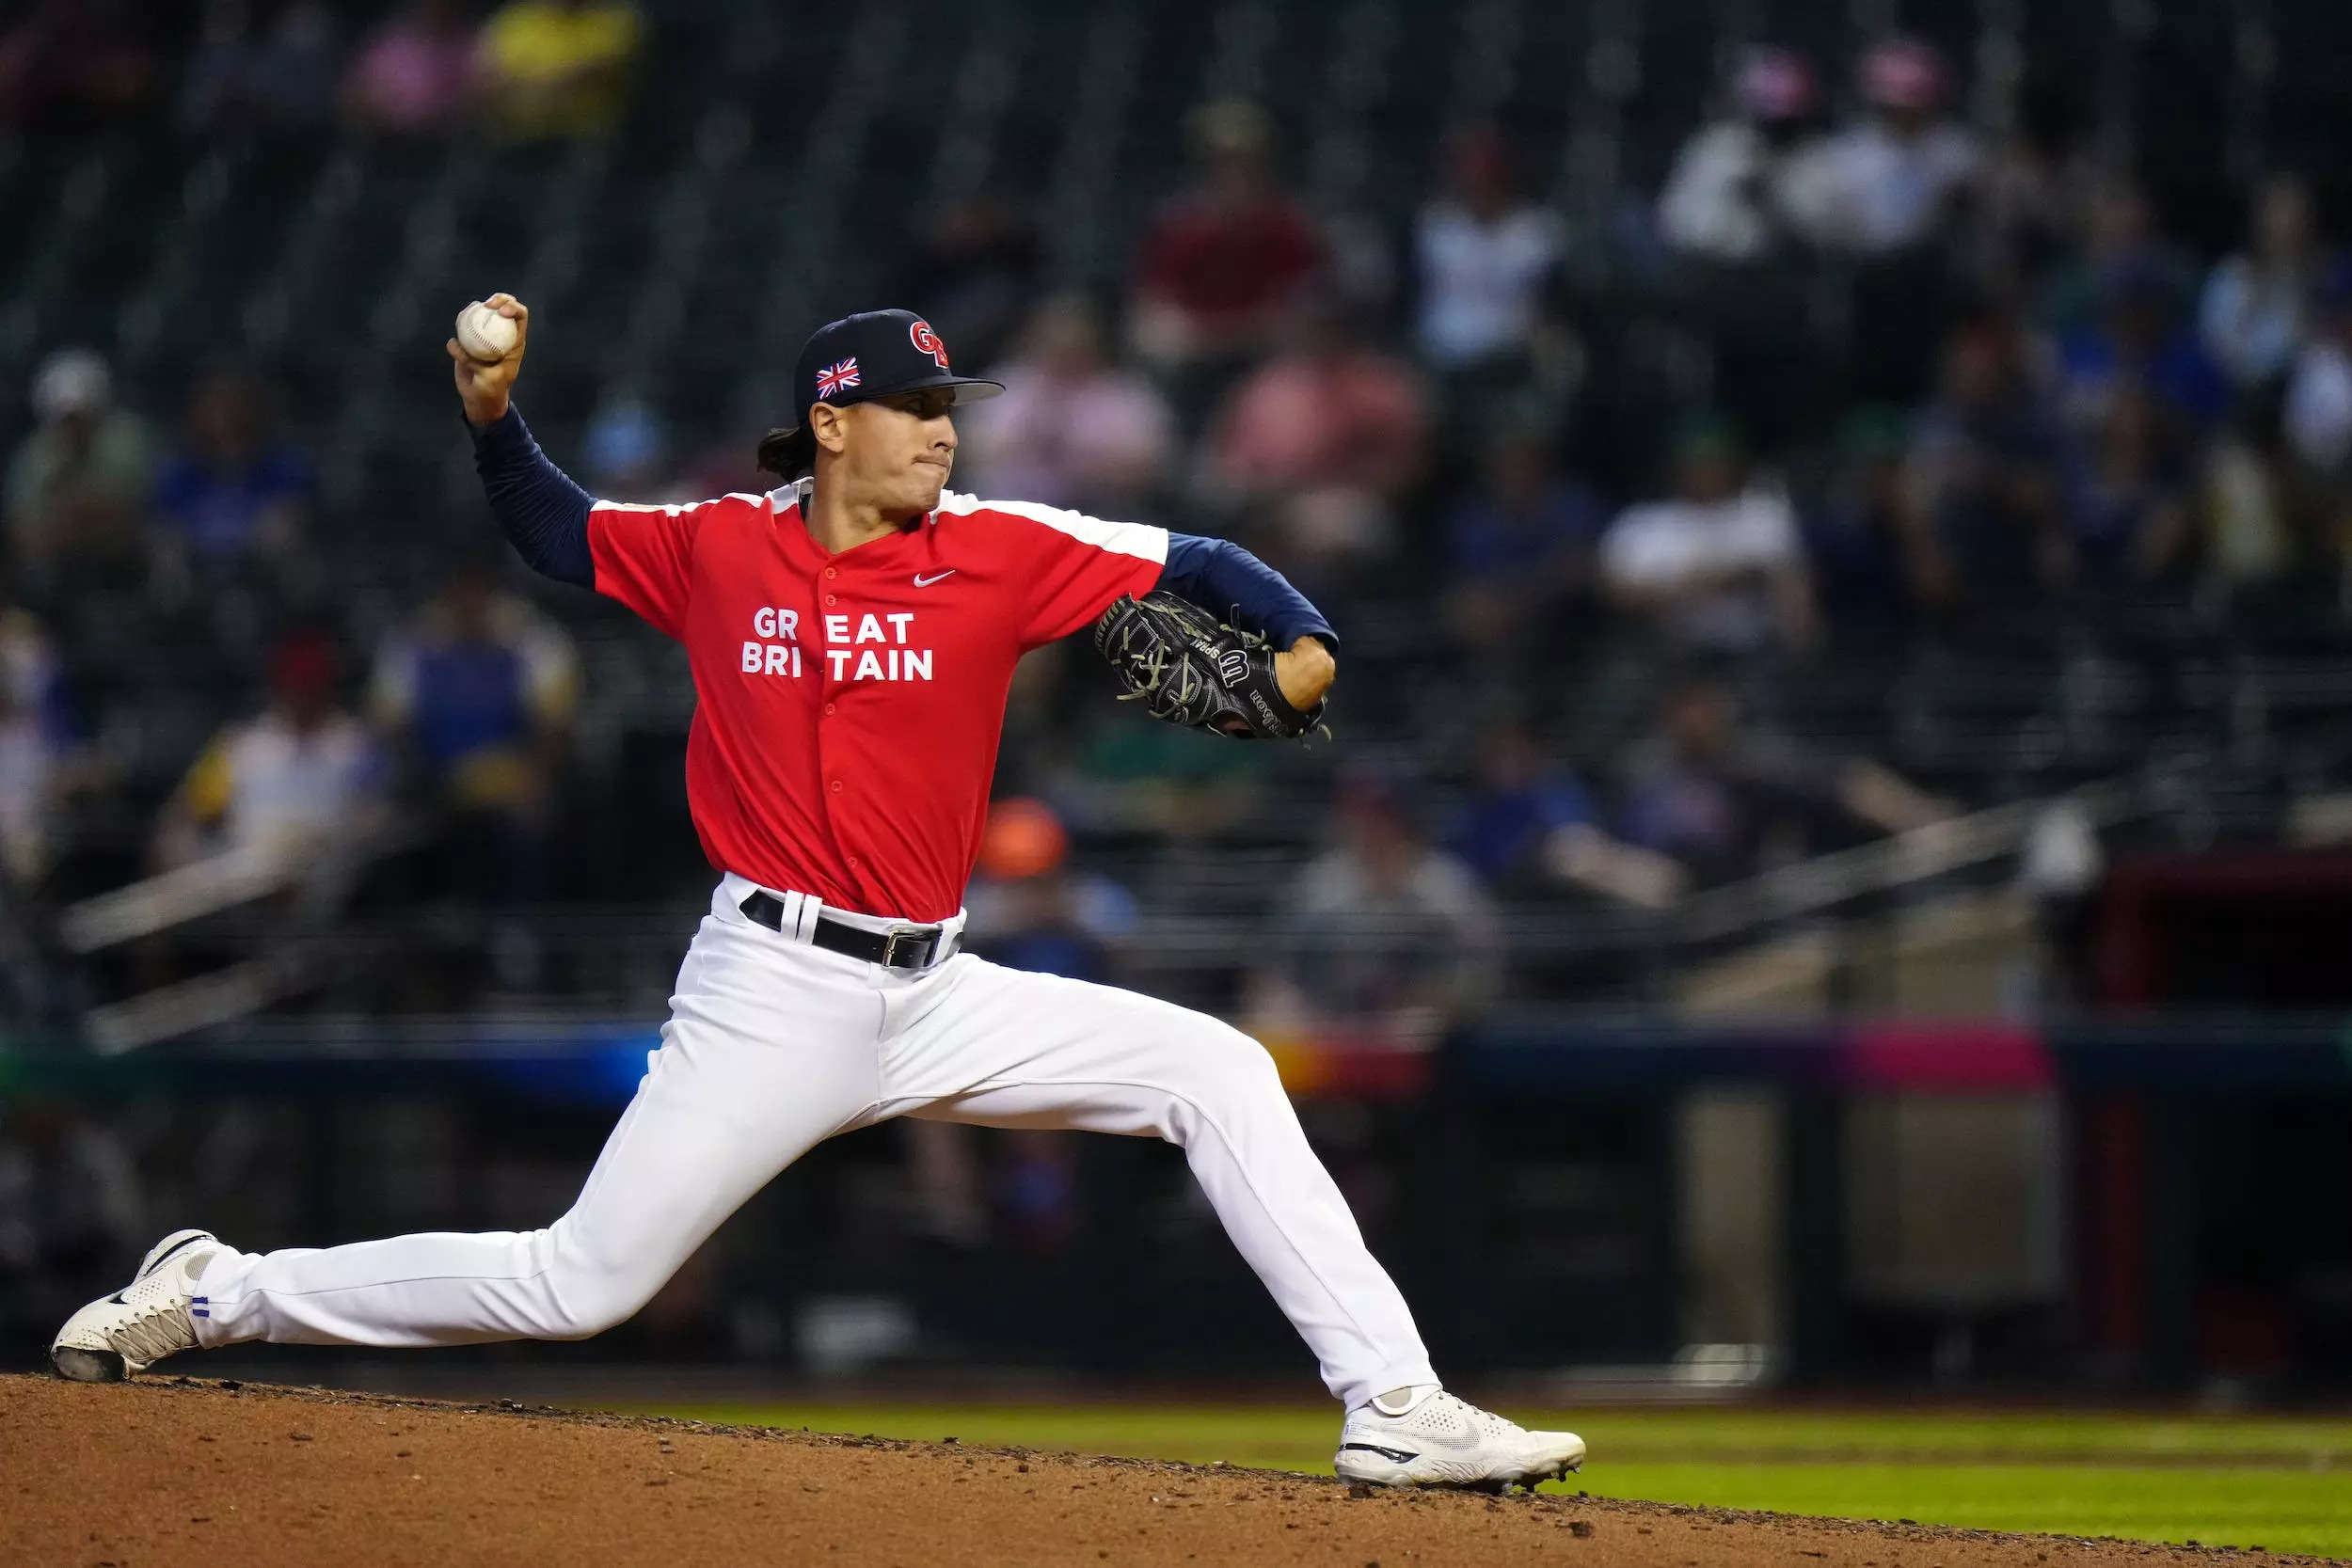 Great Britain's World Baseball Classic uniforms are being called